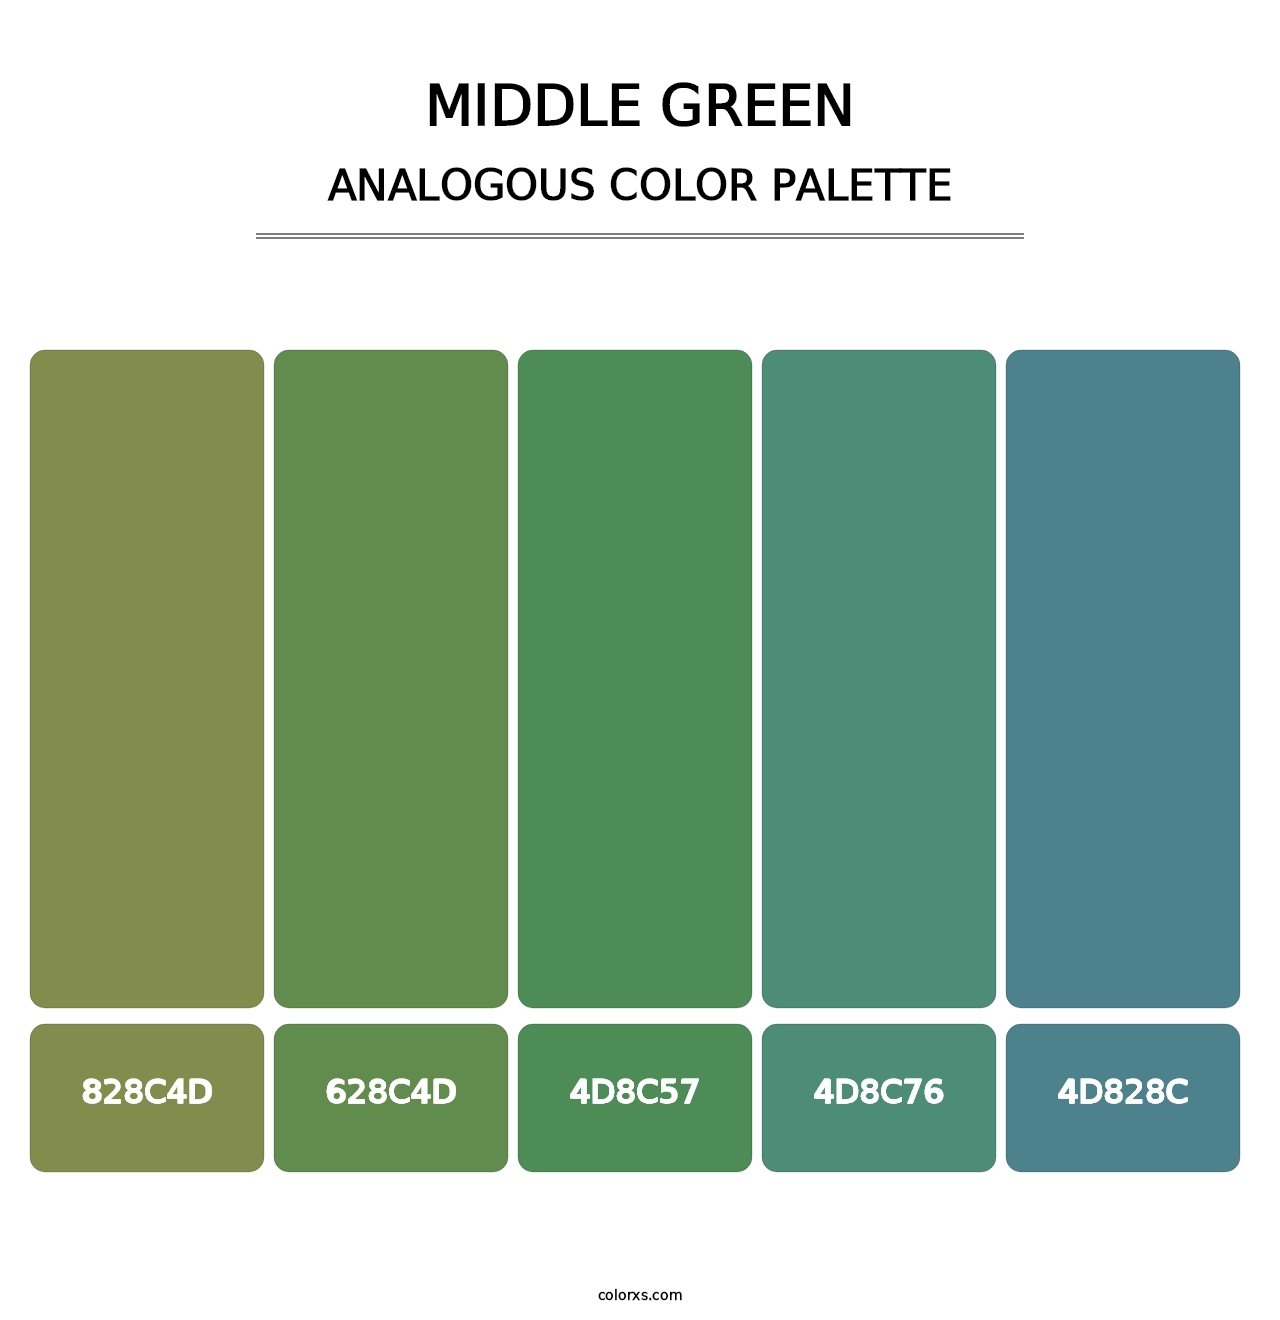 Middle Green - Analogous Color Palette